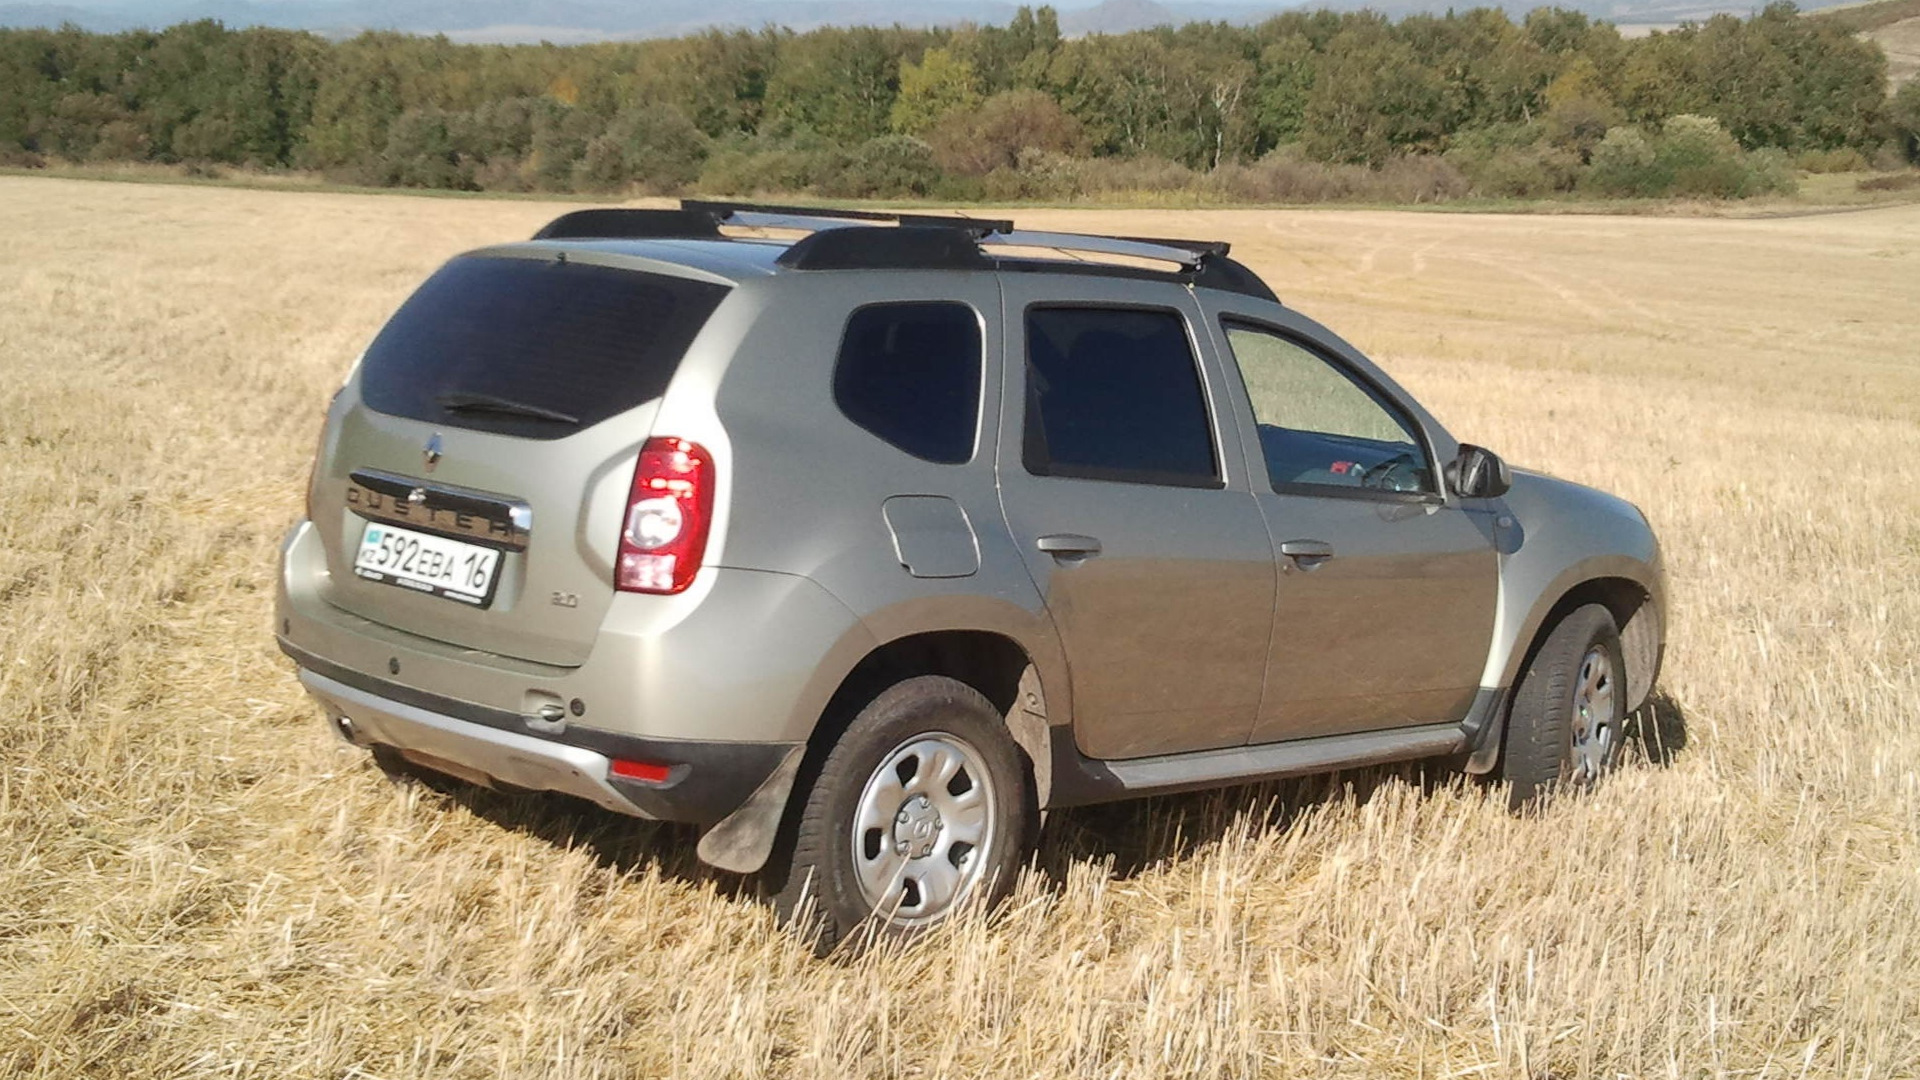 Рено дастер 2015 2.0. Renault Duster 2.0 4wd. Renault Duster 4wd. Renault Duster 2.0 4wd 2014. Renault Duster 1 2.0.